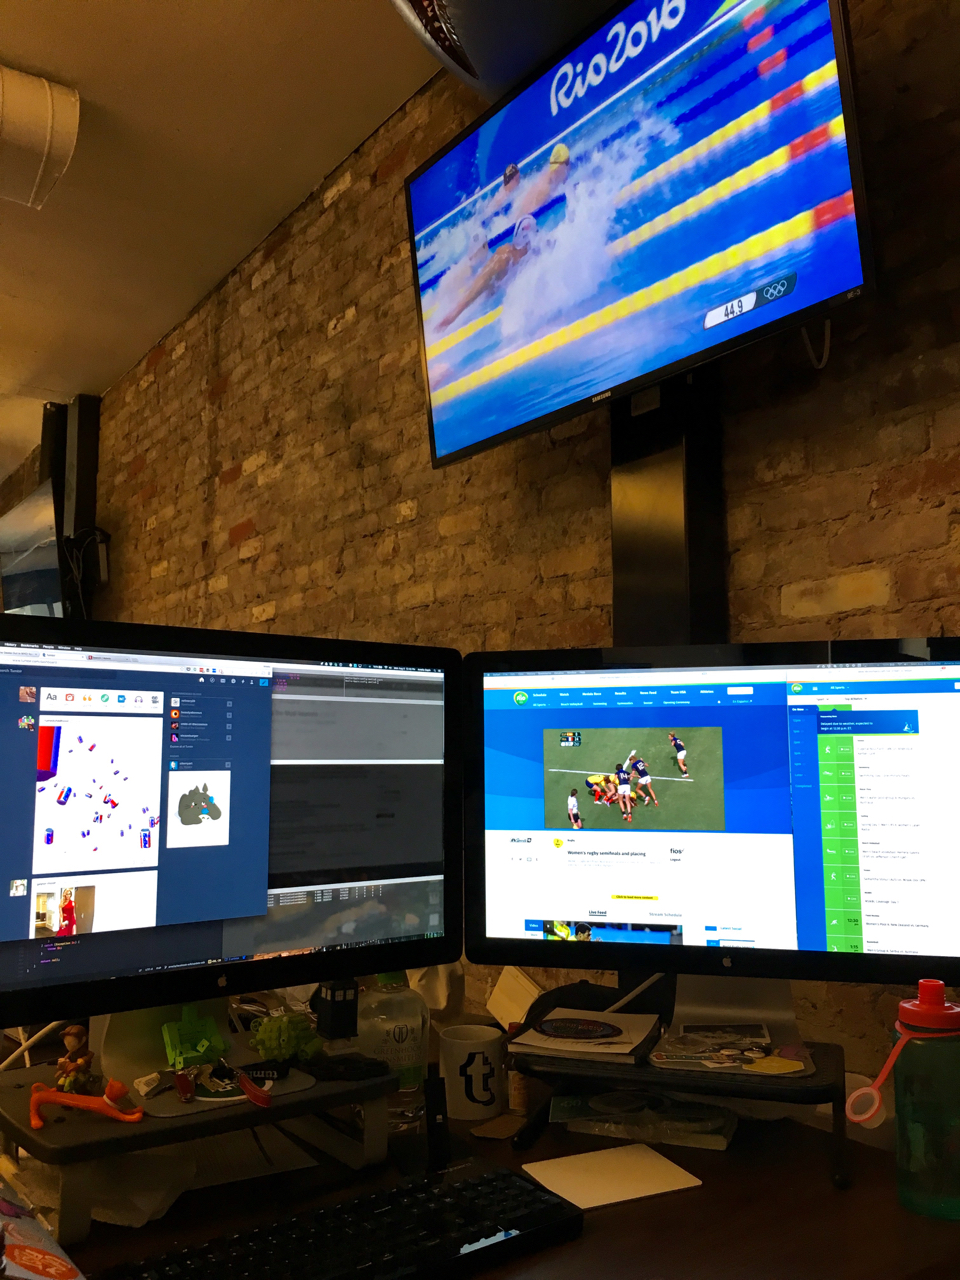 How I watch the Olympics while at work